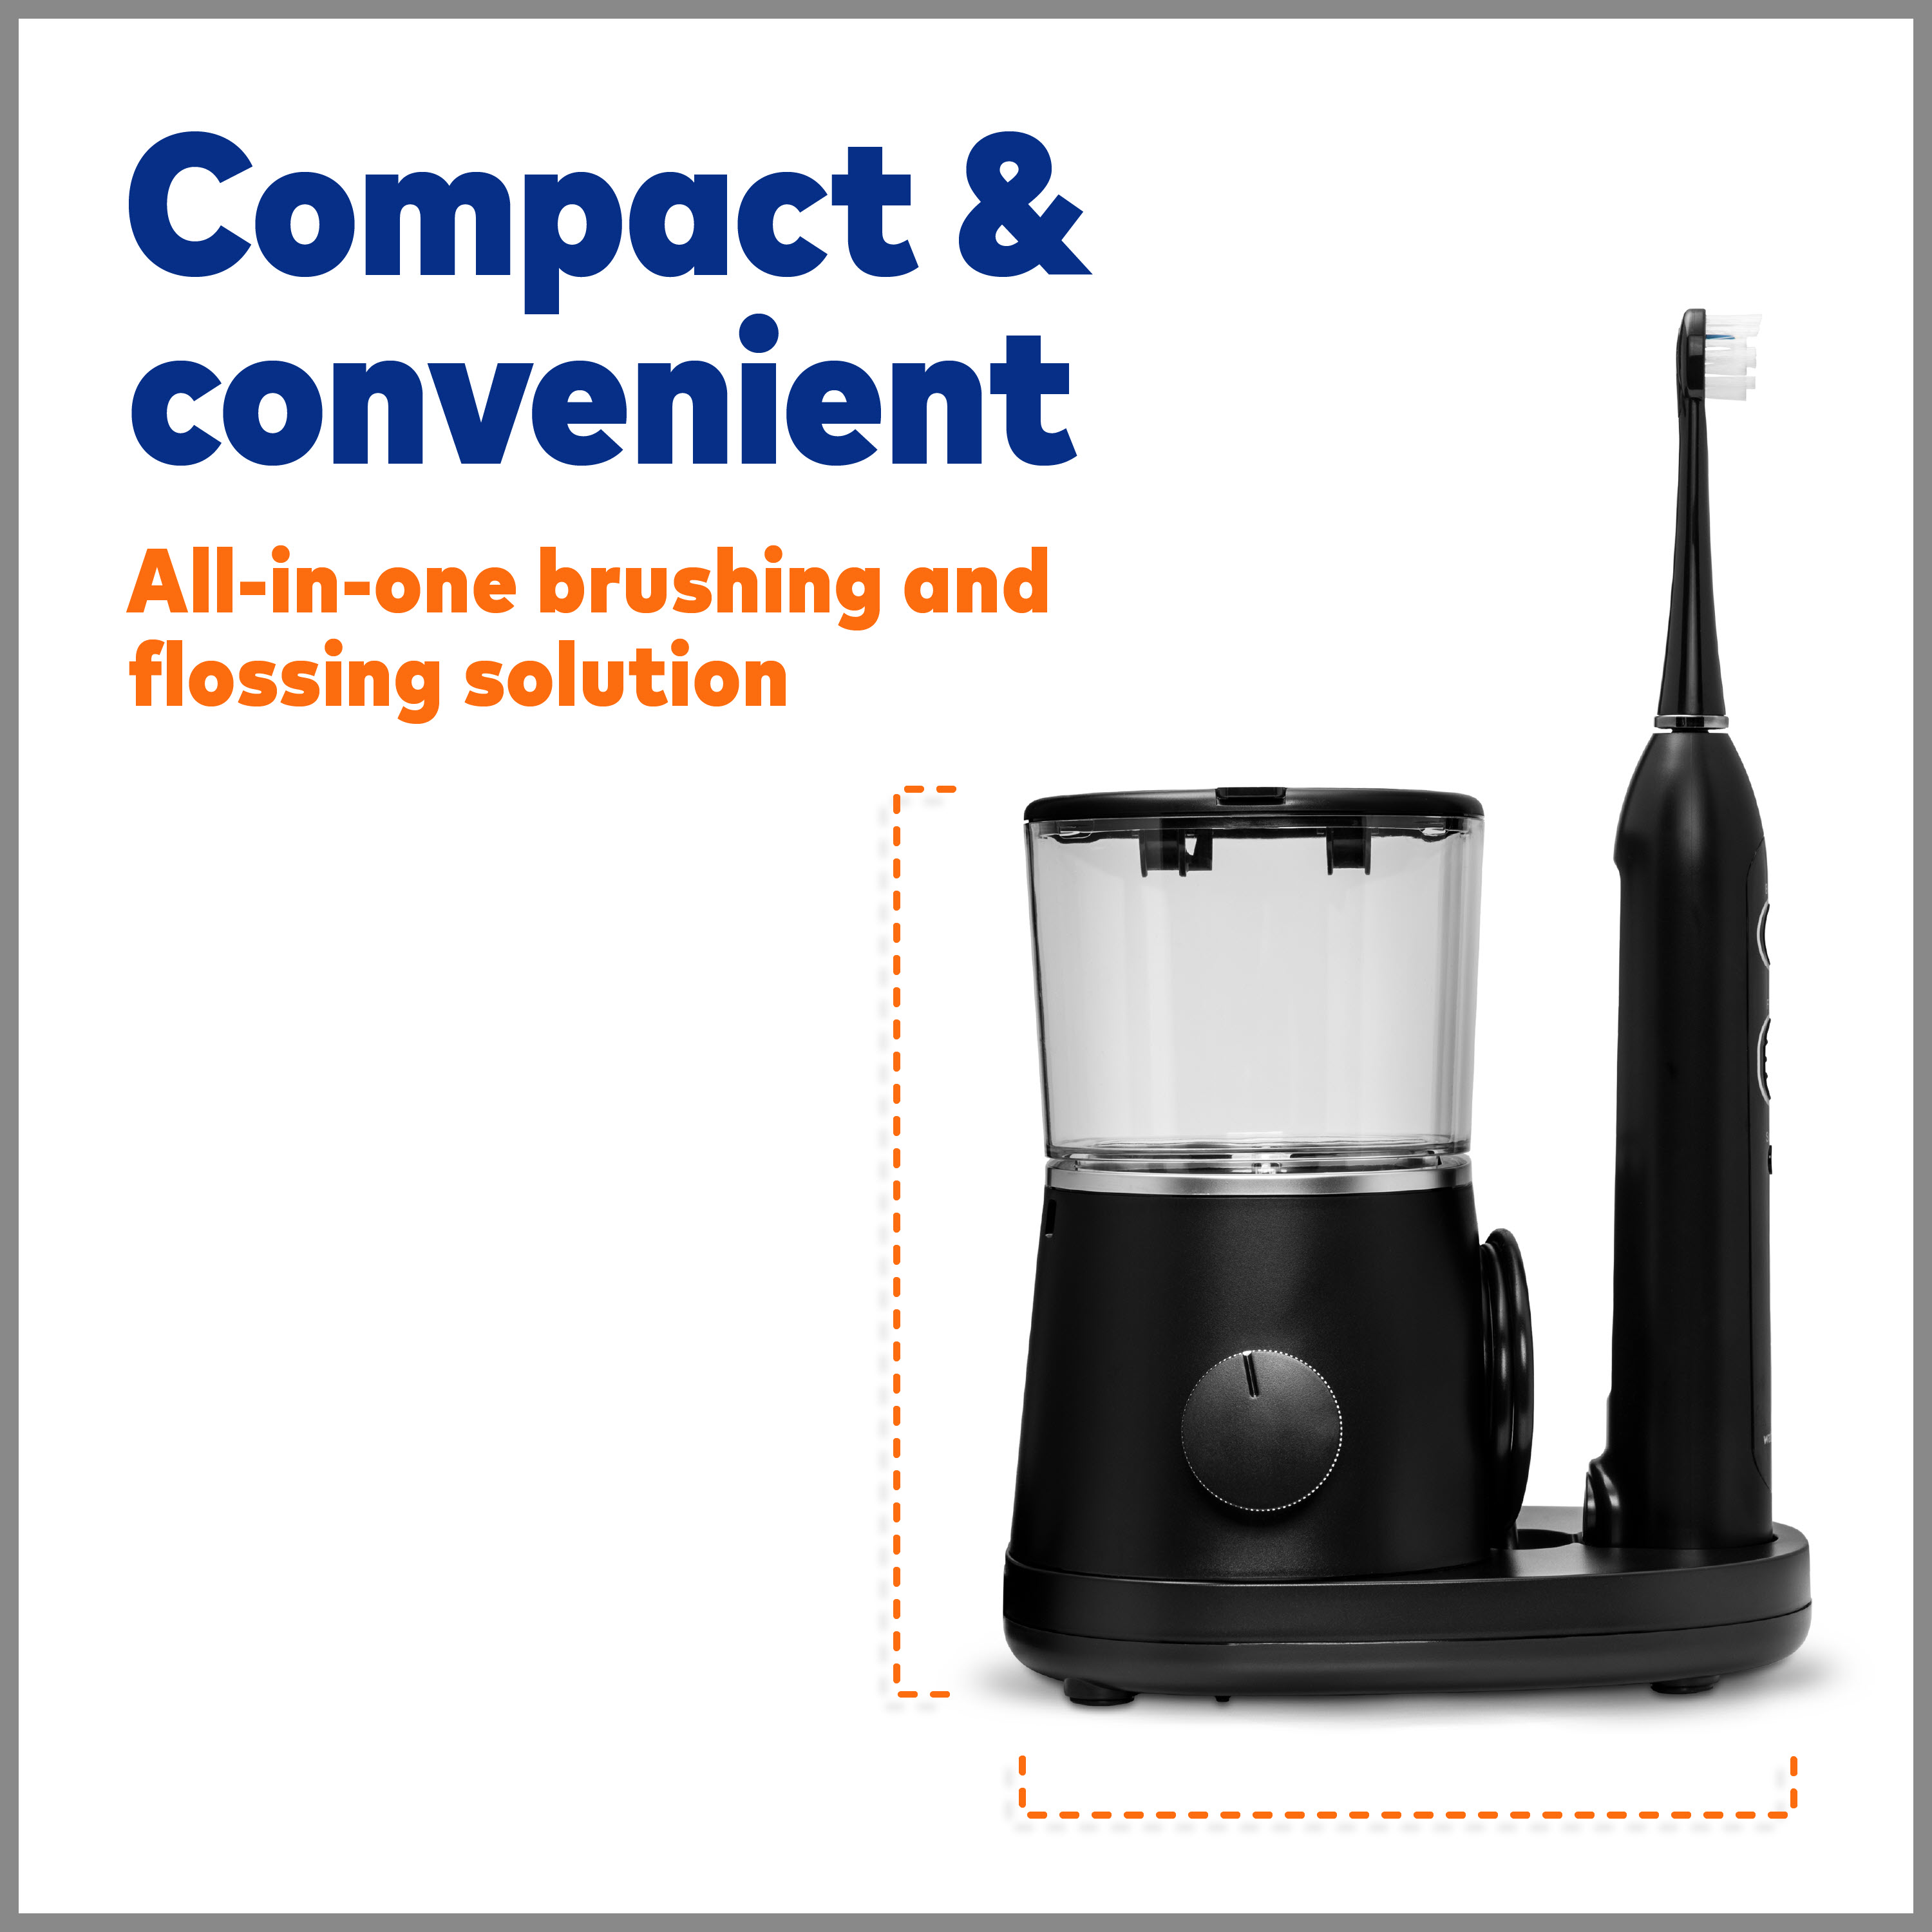 Waterpik Sonic-Fusion 2.0 Flossing Toothbrush, Electric Toothbrush & Water Flosser Combo, Black - image 5 of 13